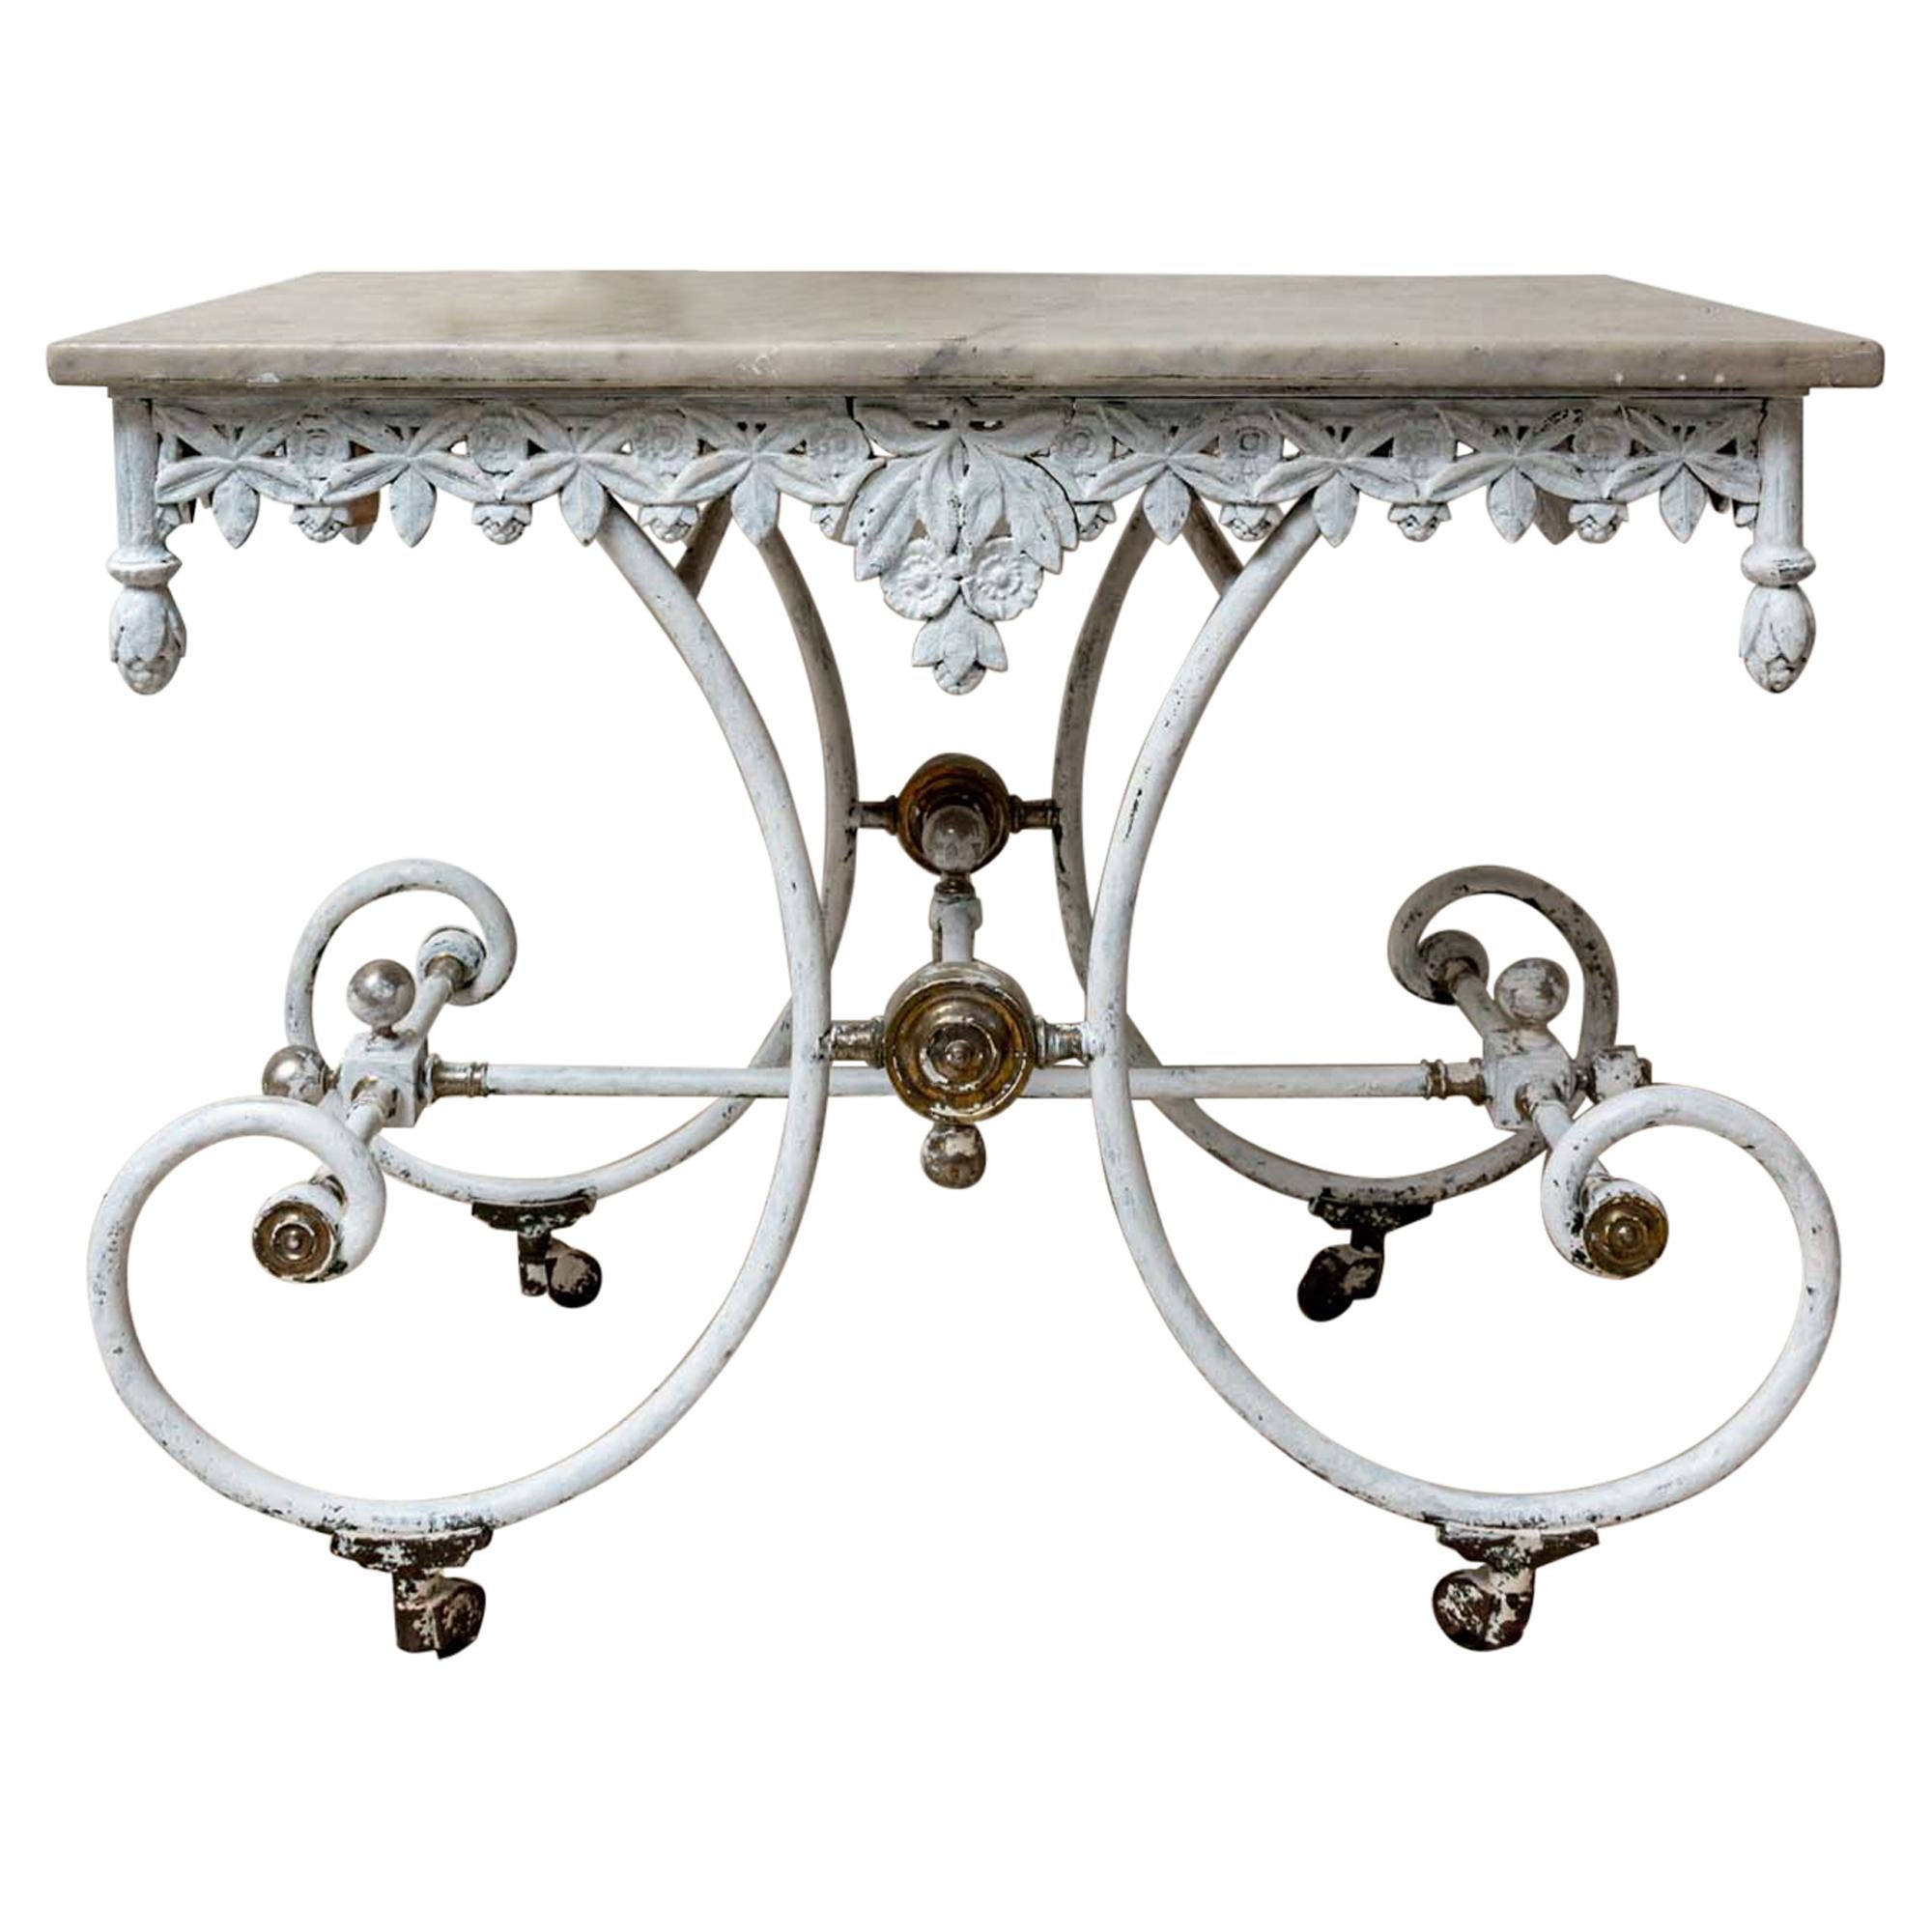 19th Century French Cast Iron Marble Topped Decorative Patisserie Side Table